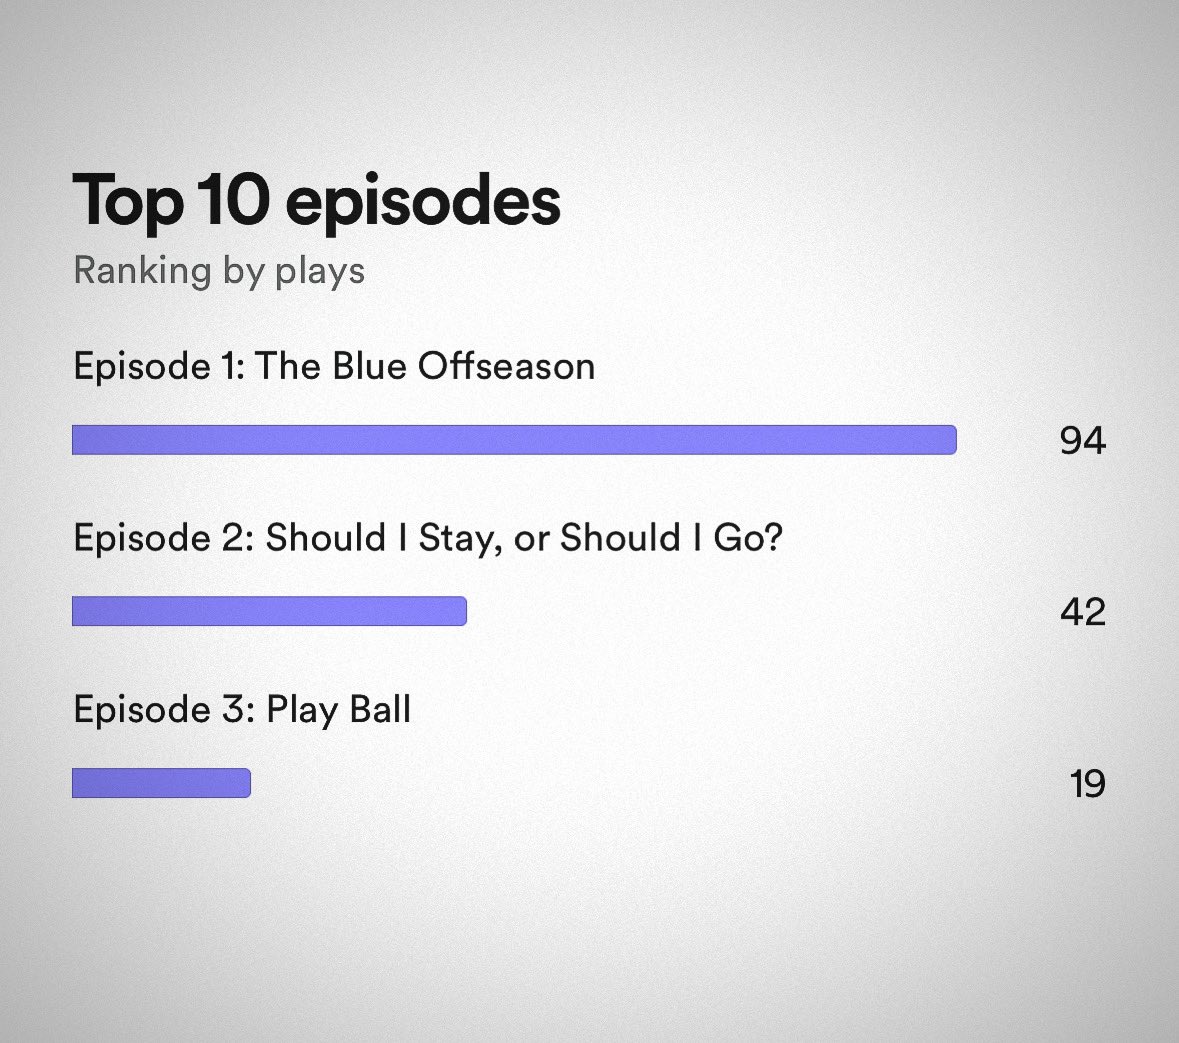 A week ago, Episode 3: Play Ball was released. 19 views  is a great start, but we know we can do better! Slide on over to Apple Podcasts or Spotify and give it a listen! #bb2at #baseballtoatee #mlb #milb #baseball #hotdog #7thinningstretch #bullpen #mound #plate #bases #ballpark